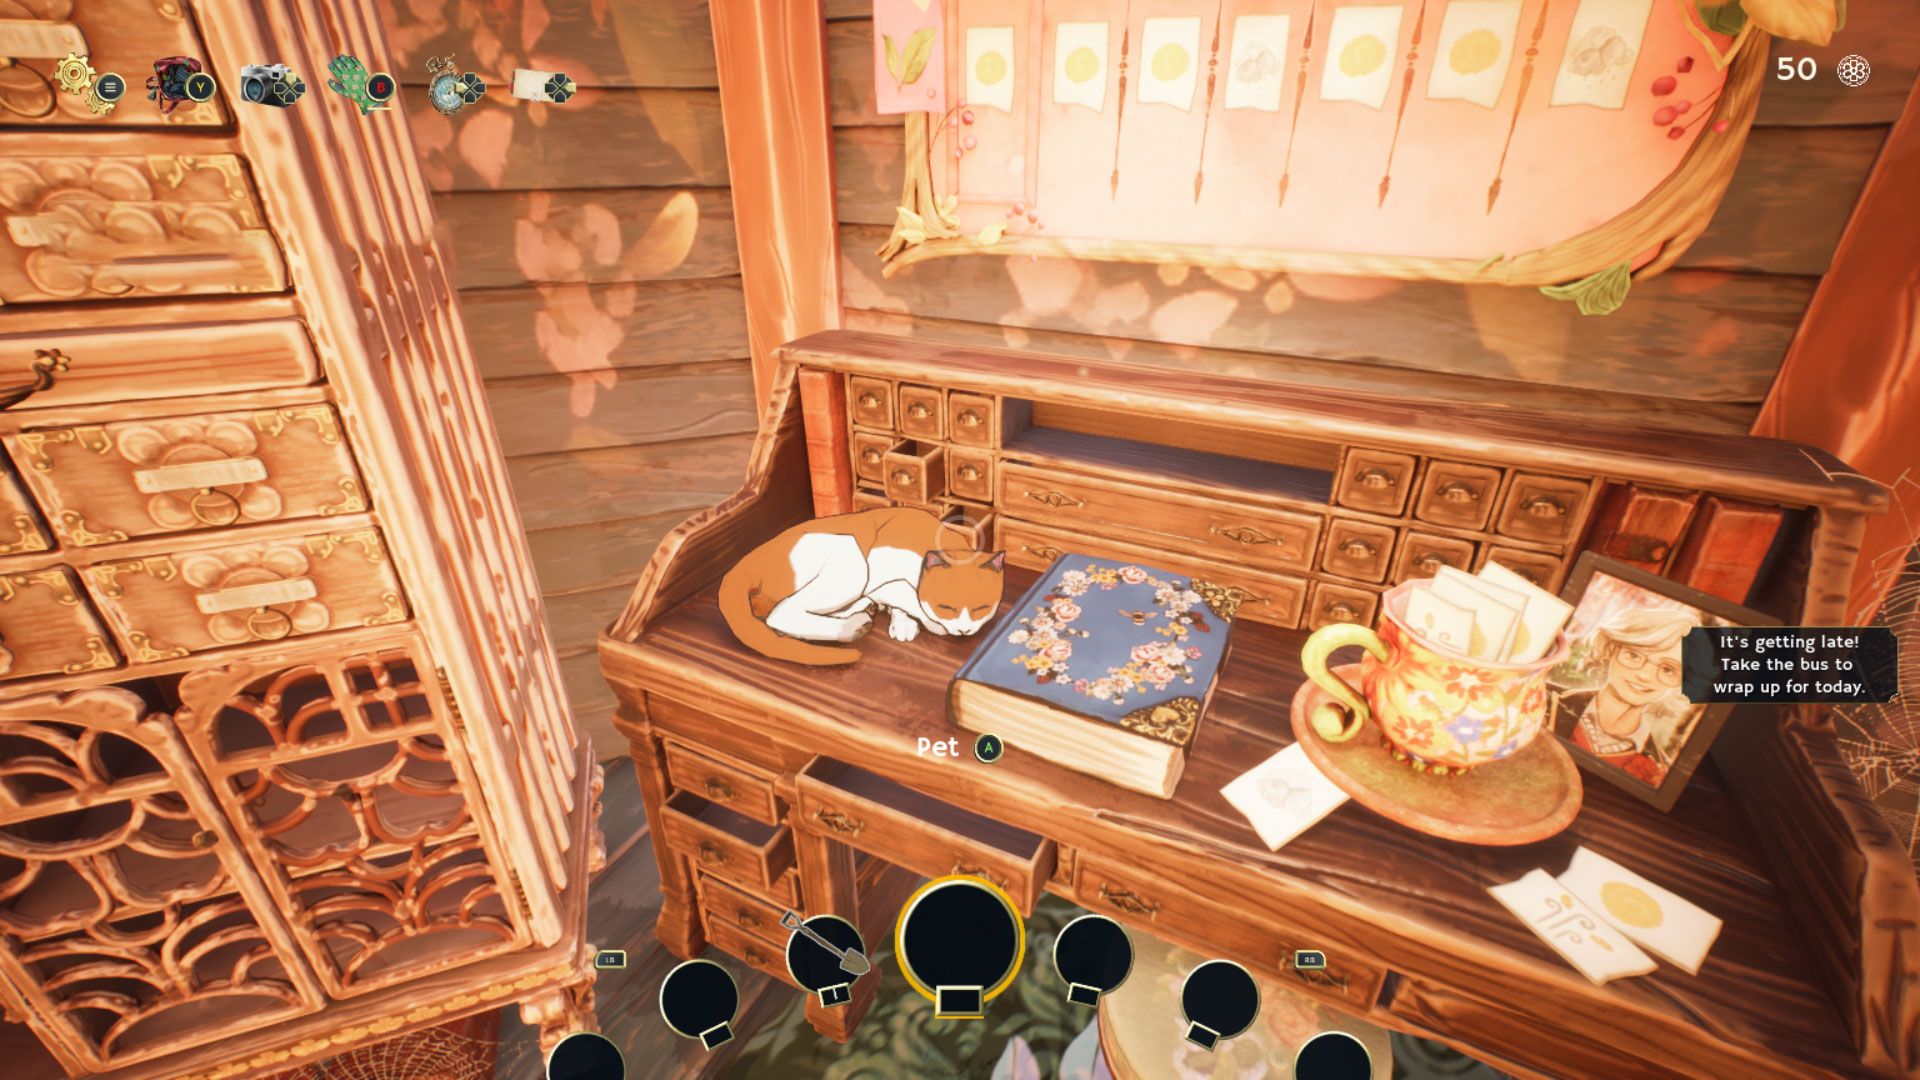 A cute sleeping cat on Robin’s desk in Garden Life: A Cozy Simulator. You can pet it!